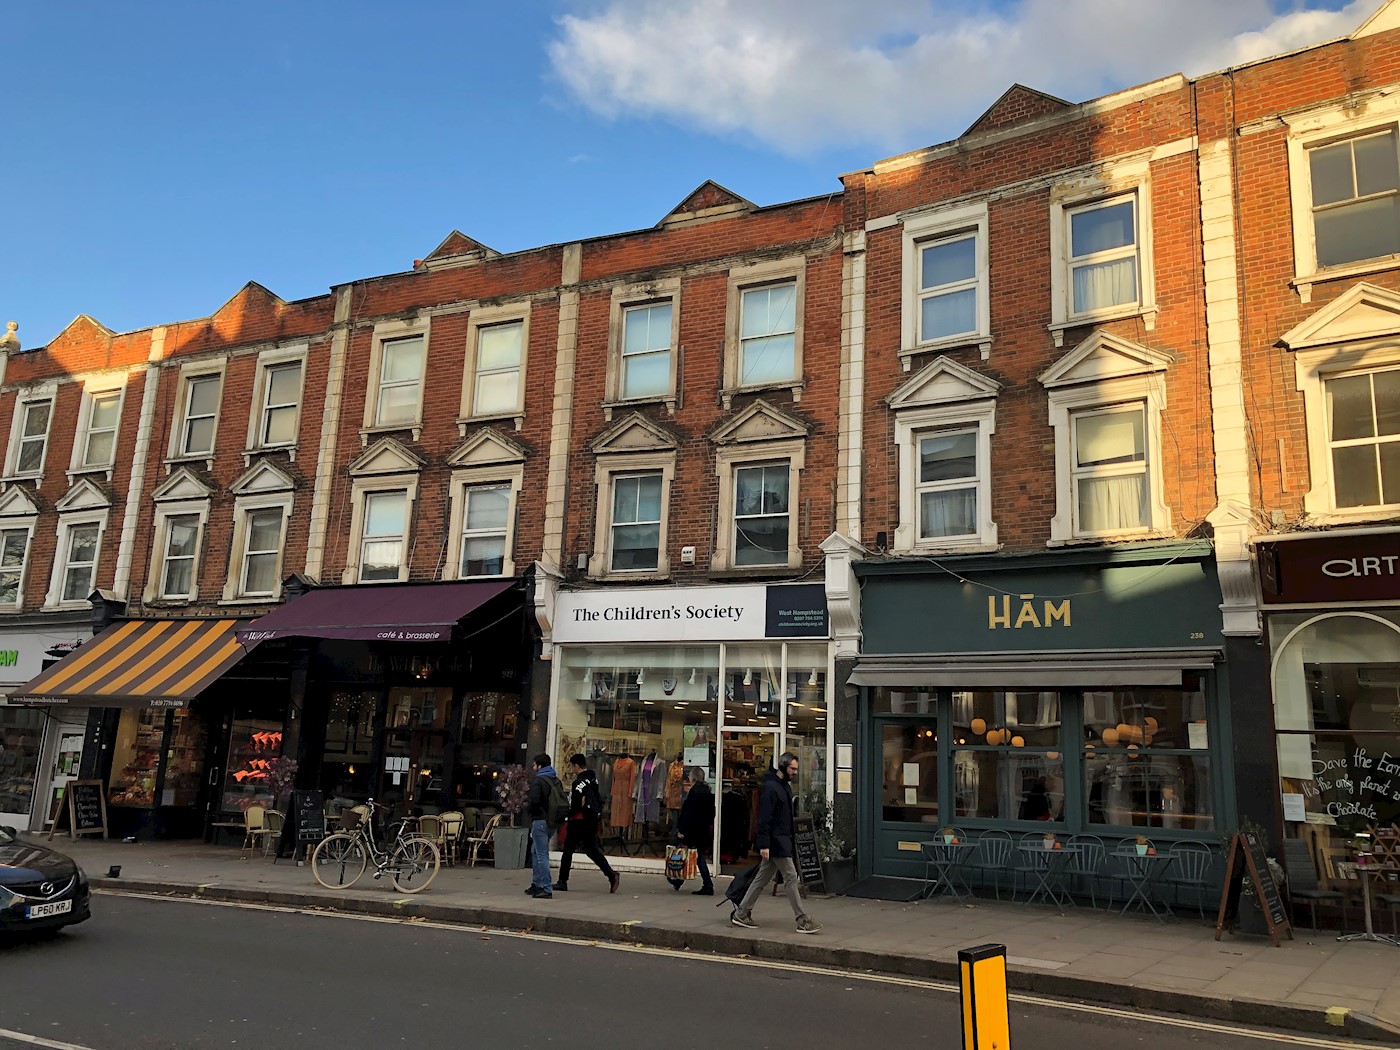 240 West End Lane, West Hampstead, NW6 1LG 1/10